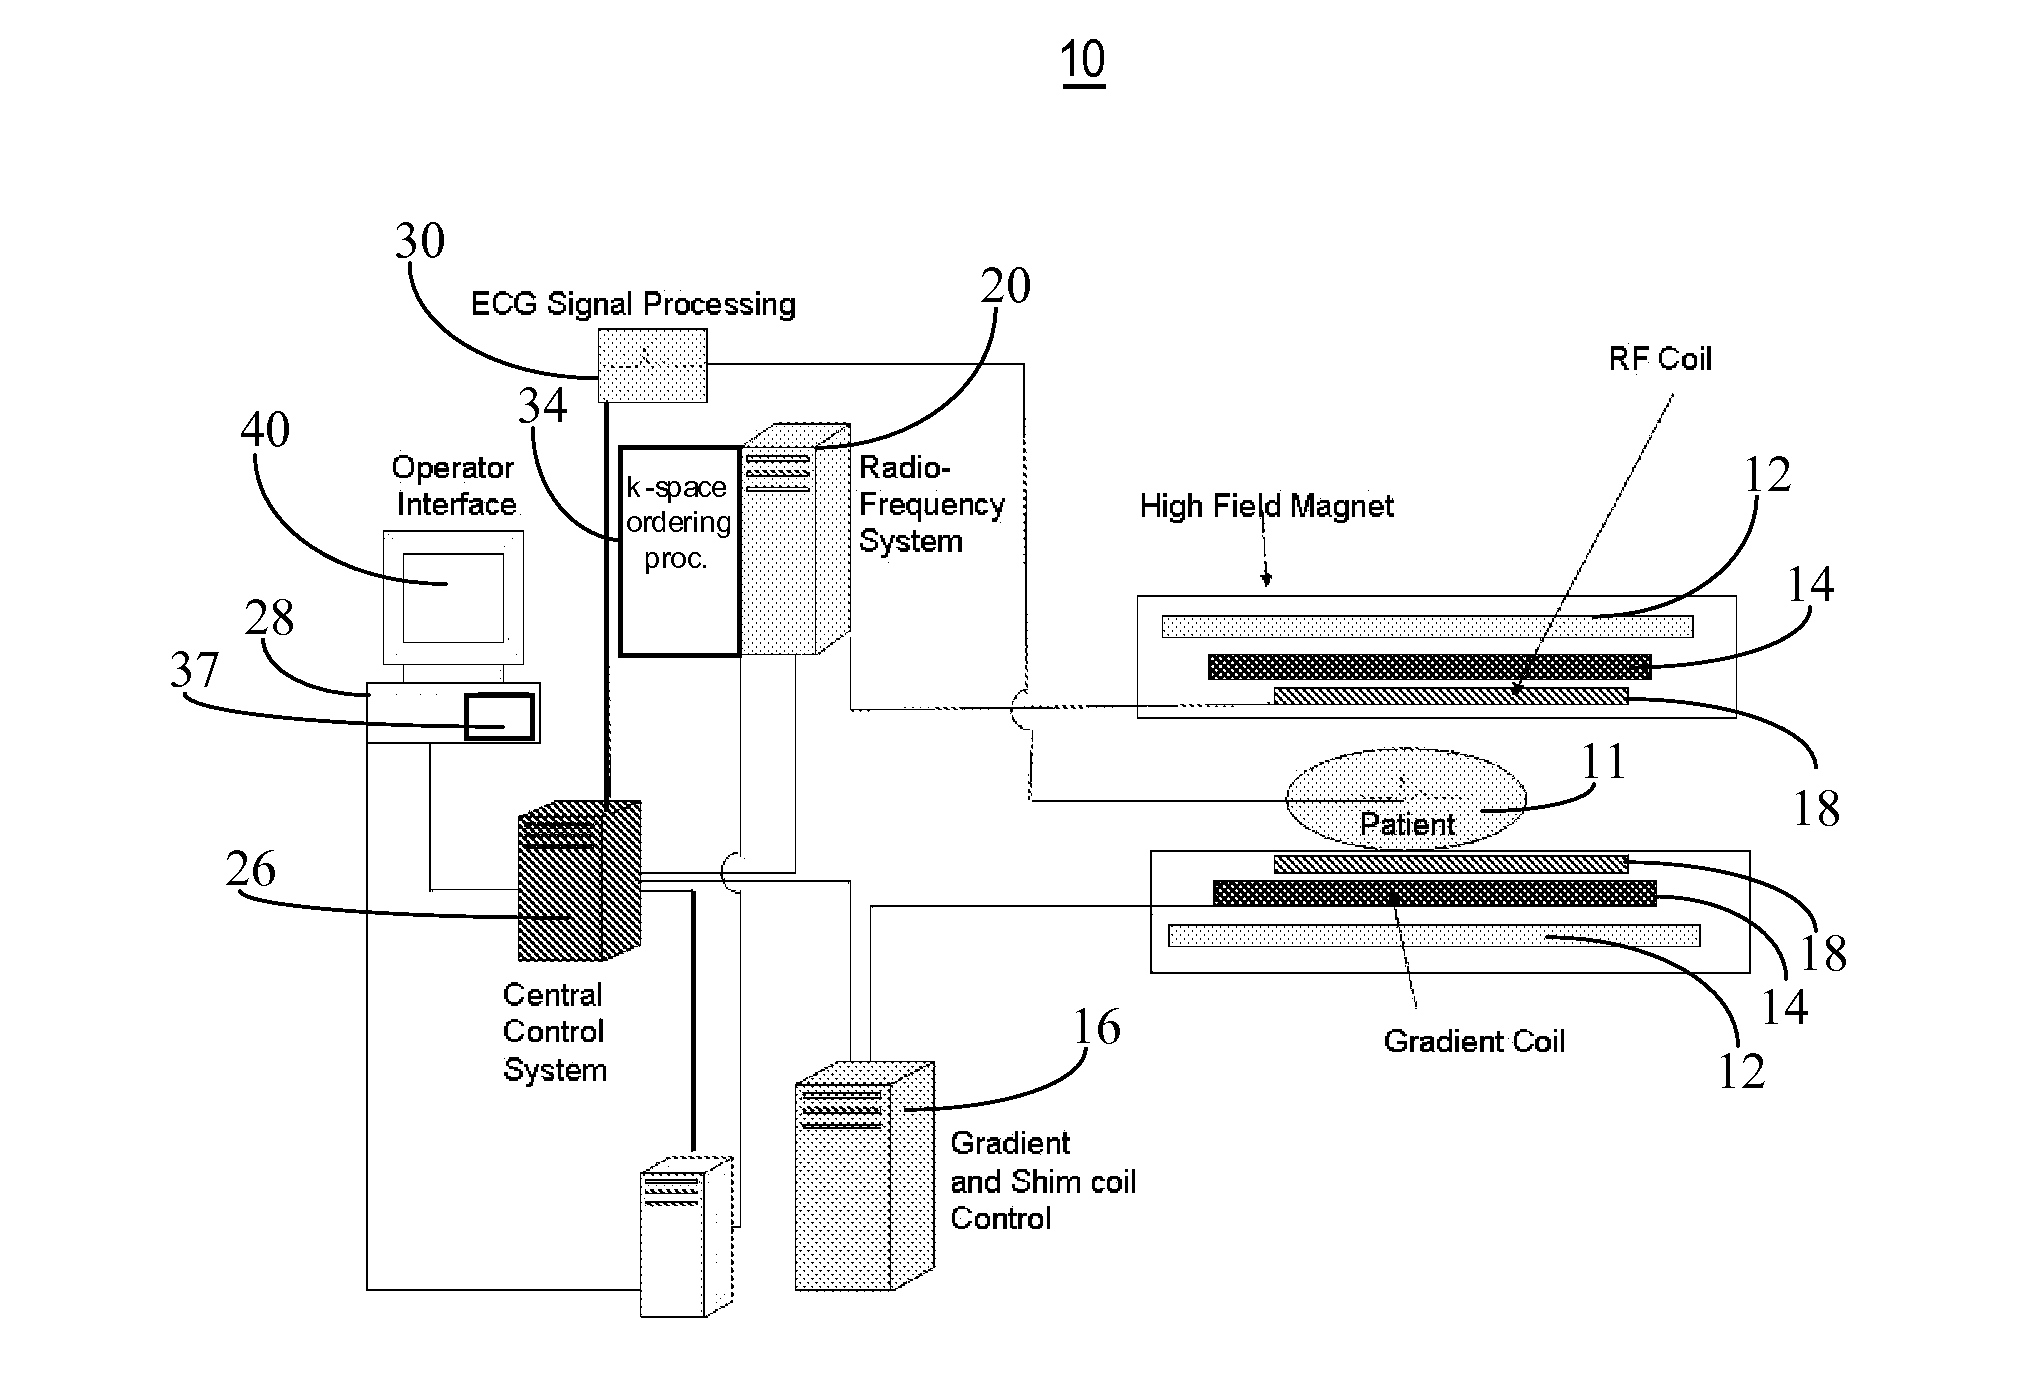 System for Accelerated Segmented MR Image Data Acquisition